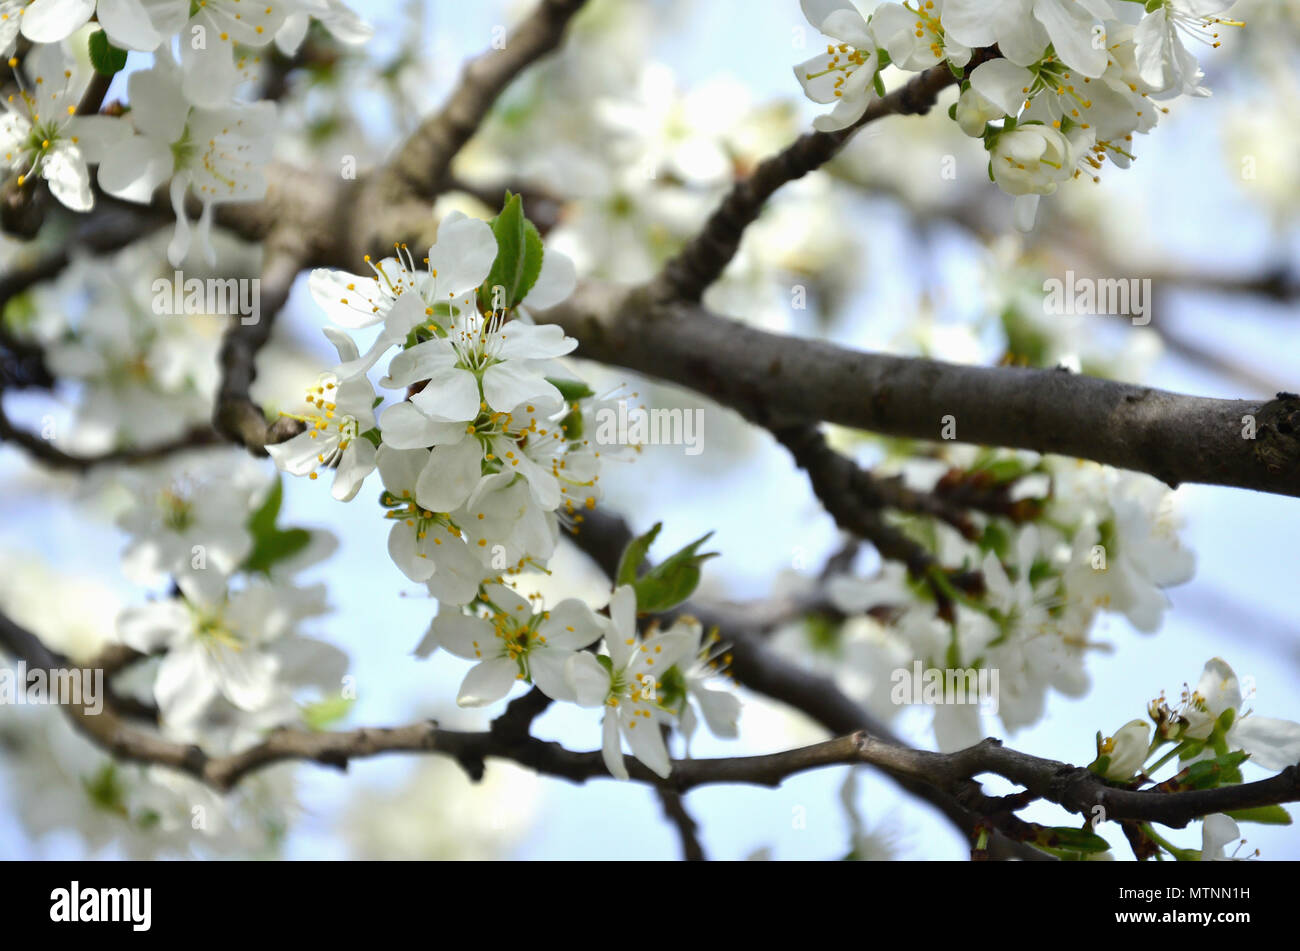 Flowering Branch Of Apricot Tree Early Flowering Of Trees In April White Apricot Flowers Of Small Size Stock Photo Alamy